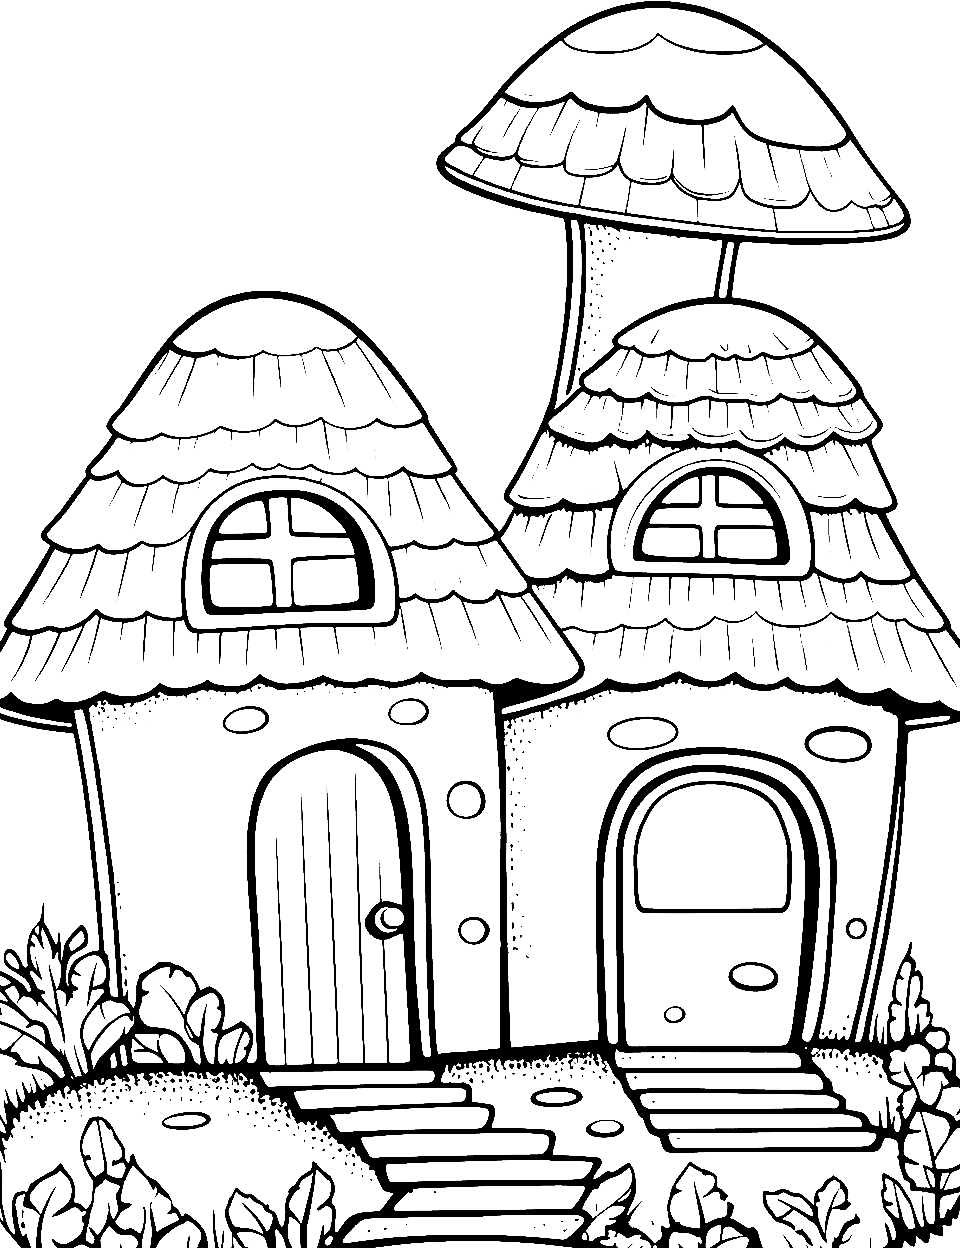 Cute Mushroom Cottages Coloring Page - Tiny houses shaped like mushrooms.